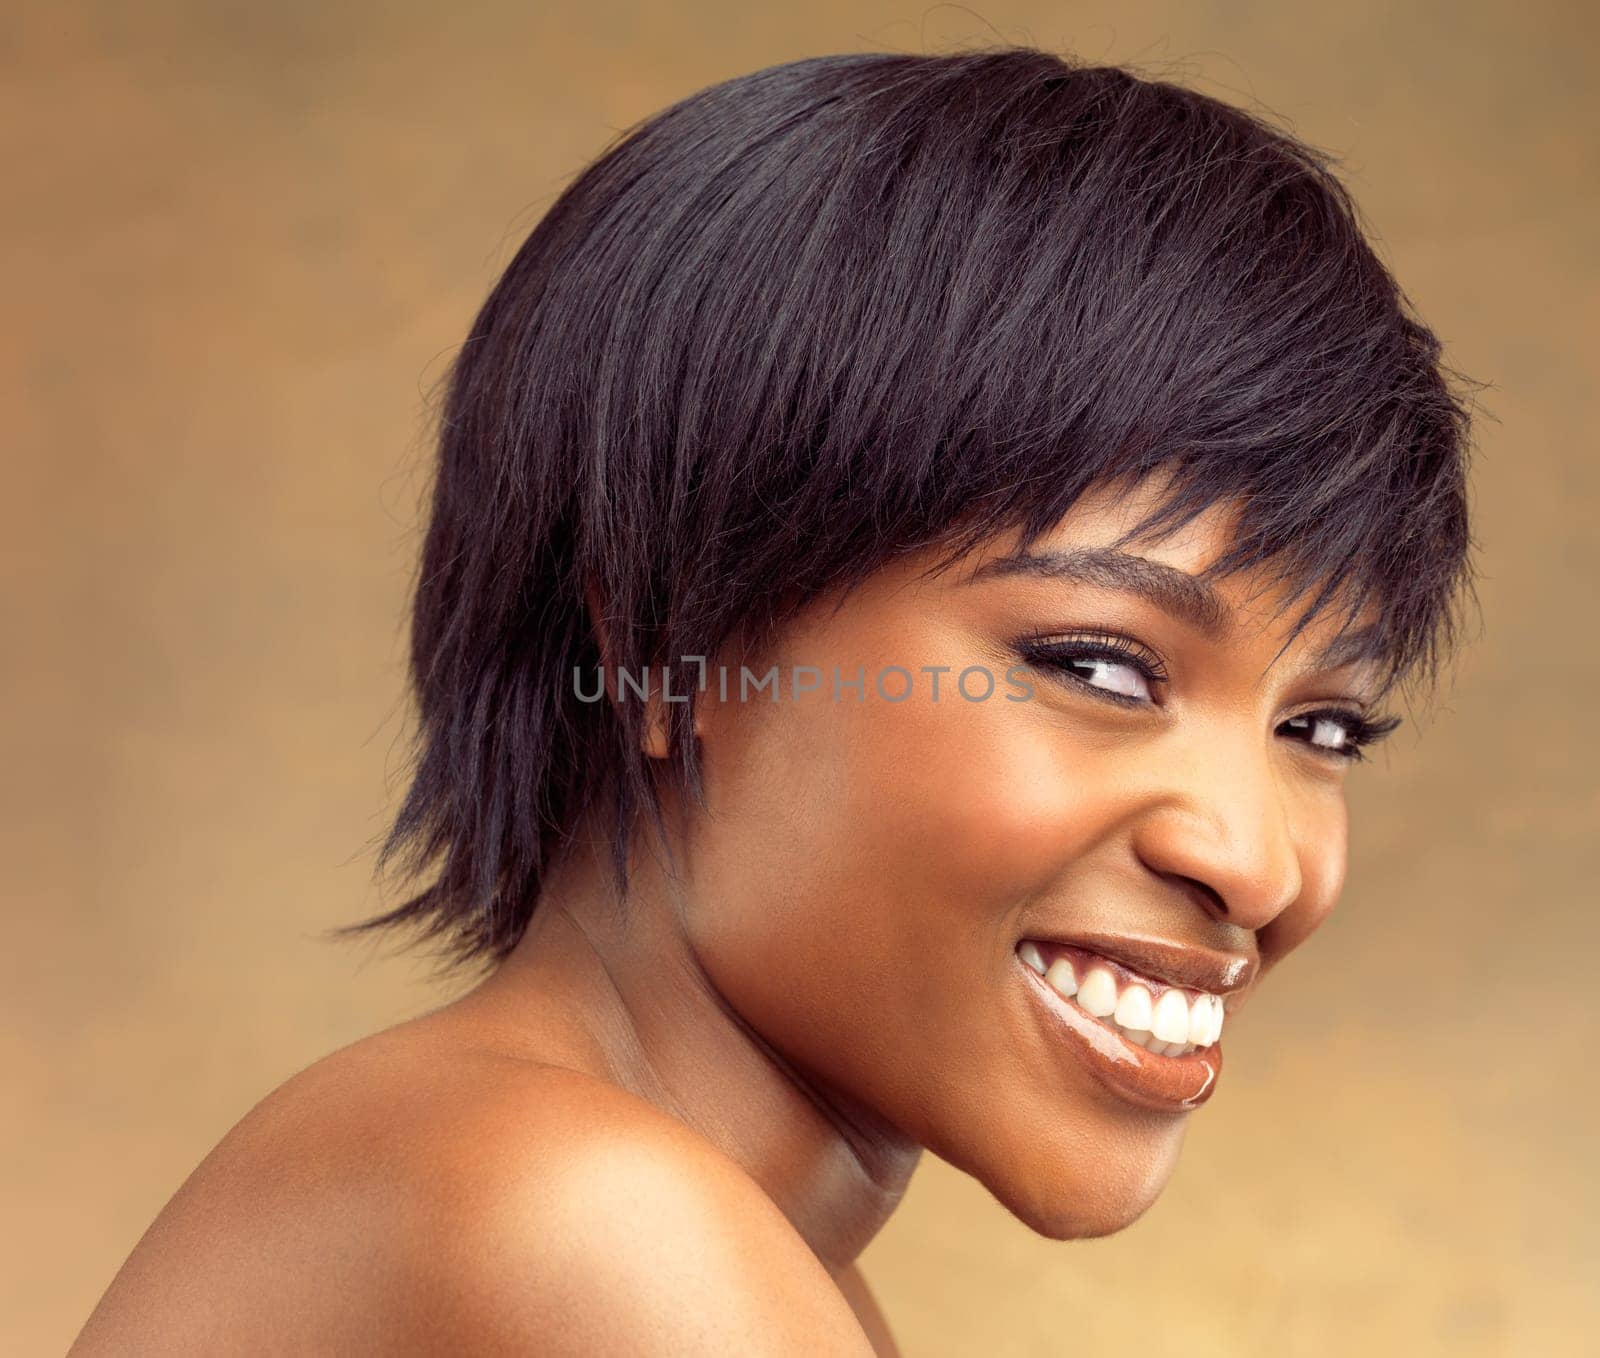 Happy, portrait and black woman in studio for hair, wellness and scalp cosmetics on brown background. Face, smile and African model with haircare results, style or texture or growth treatment choice.